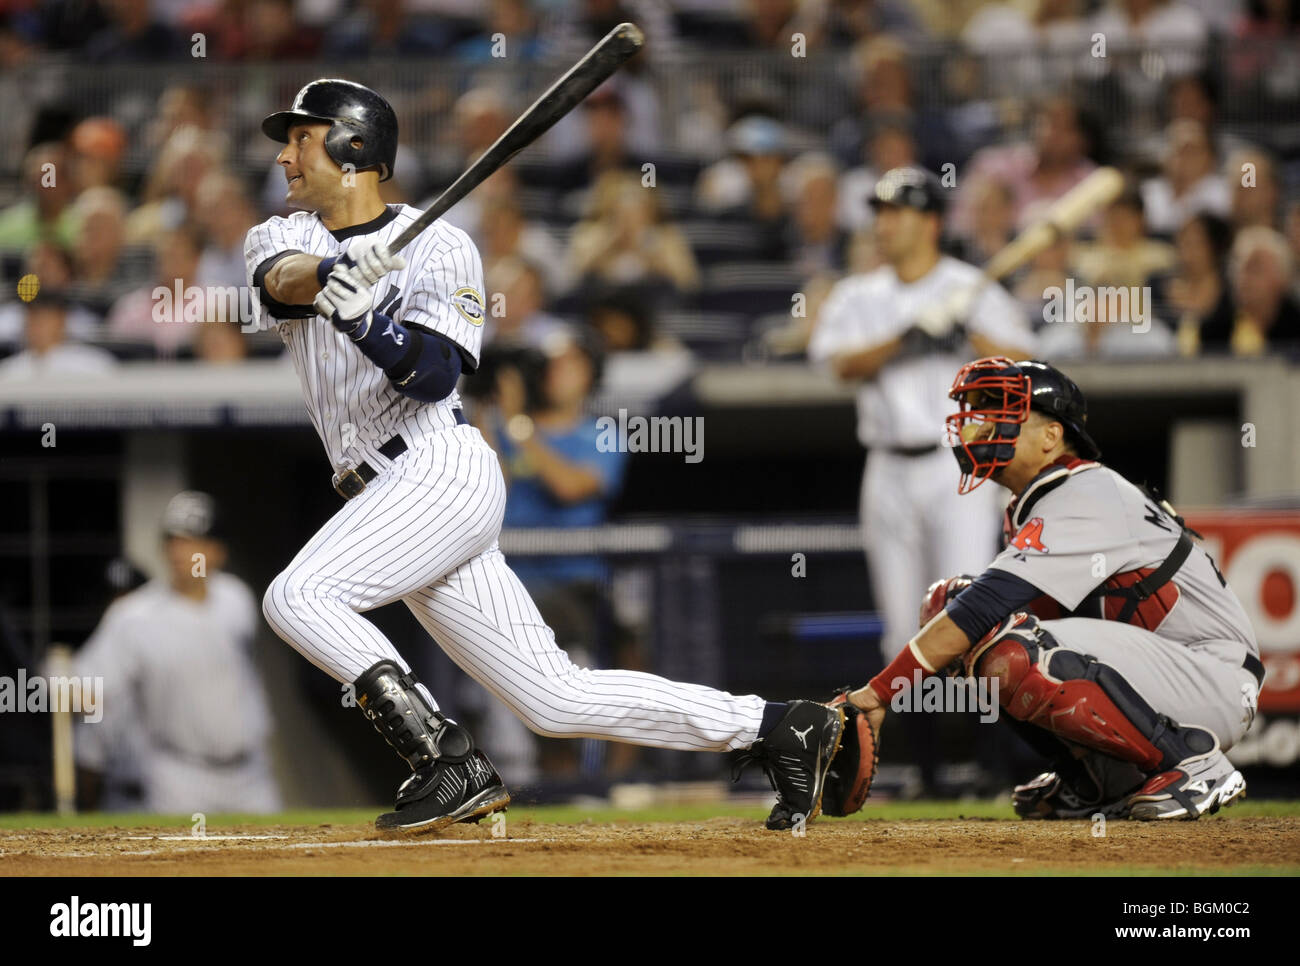 Derek Jeter #2 of the New York Yankees at bat during the game against the Boston Red Sox at Yankee Stadium on August 6, 2009 Stock Photo